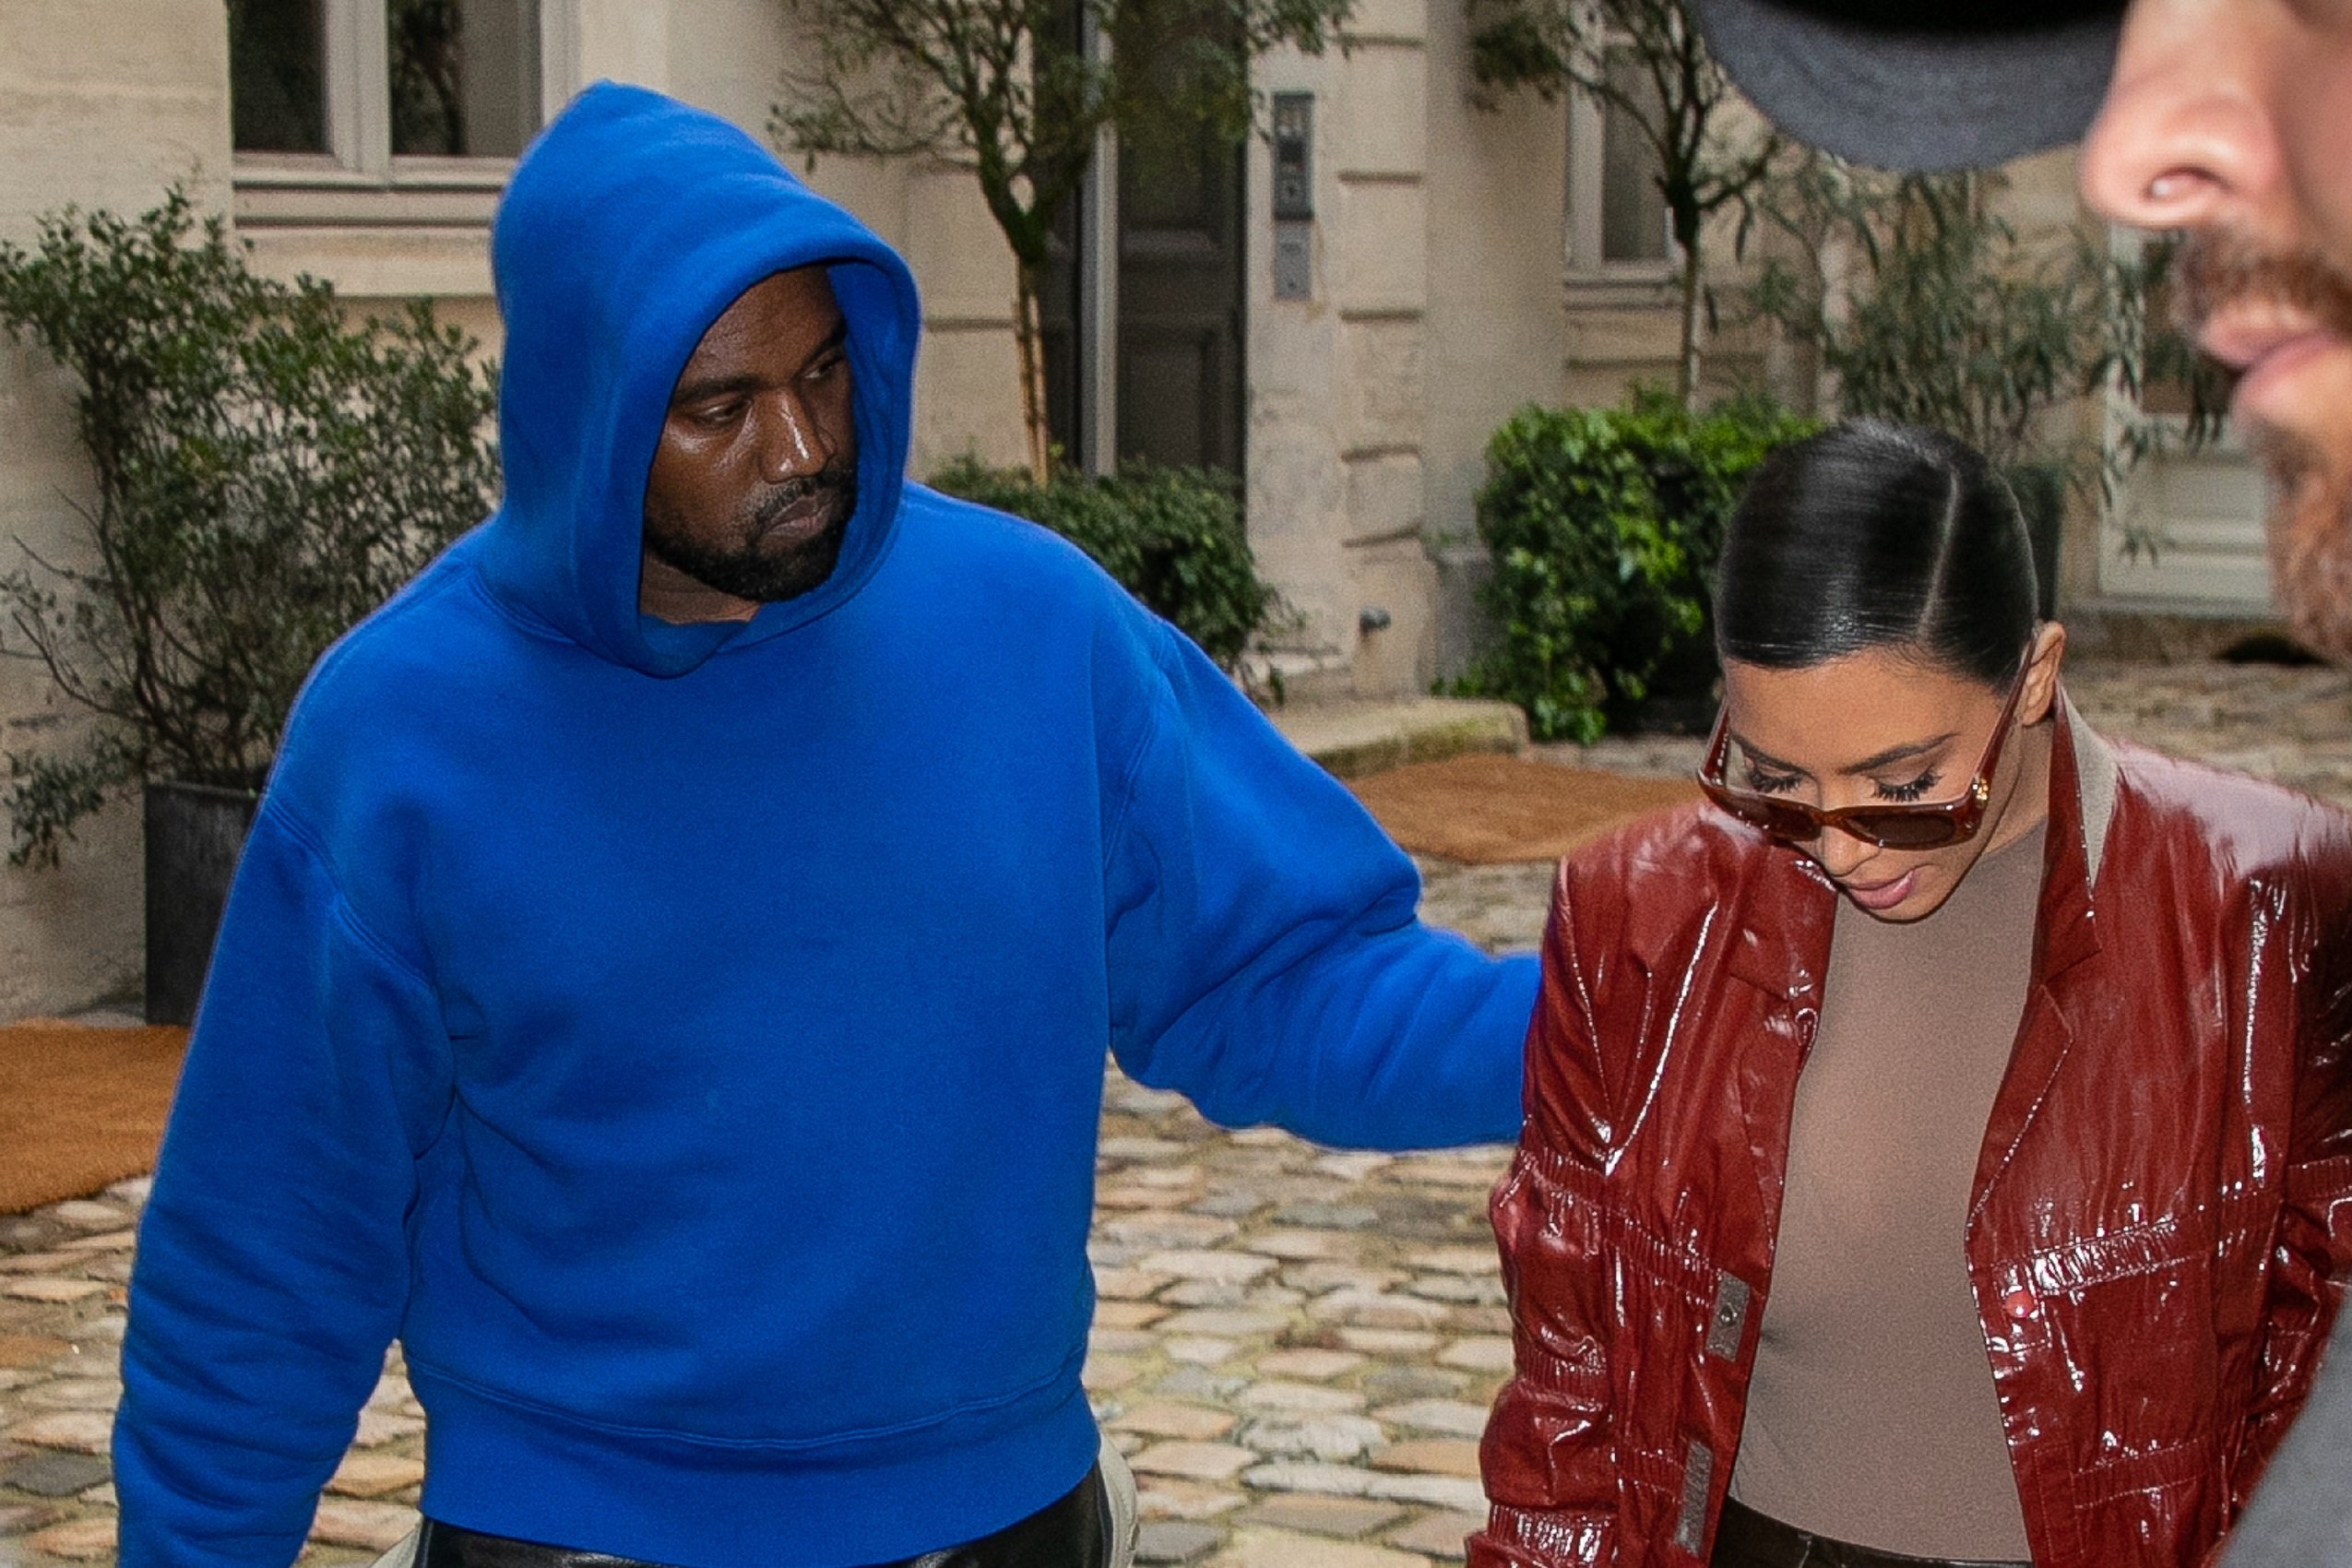 Kim Kardashian West and Kanye West in Paris on March 2, 2020